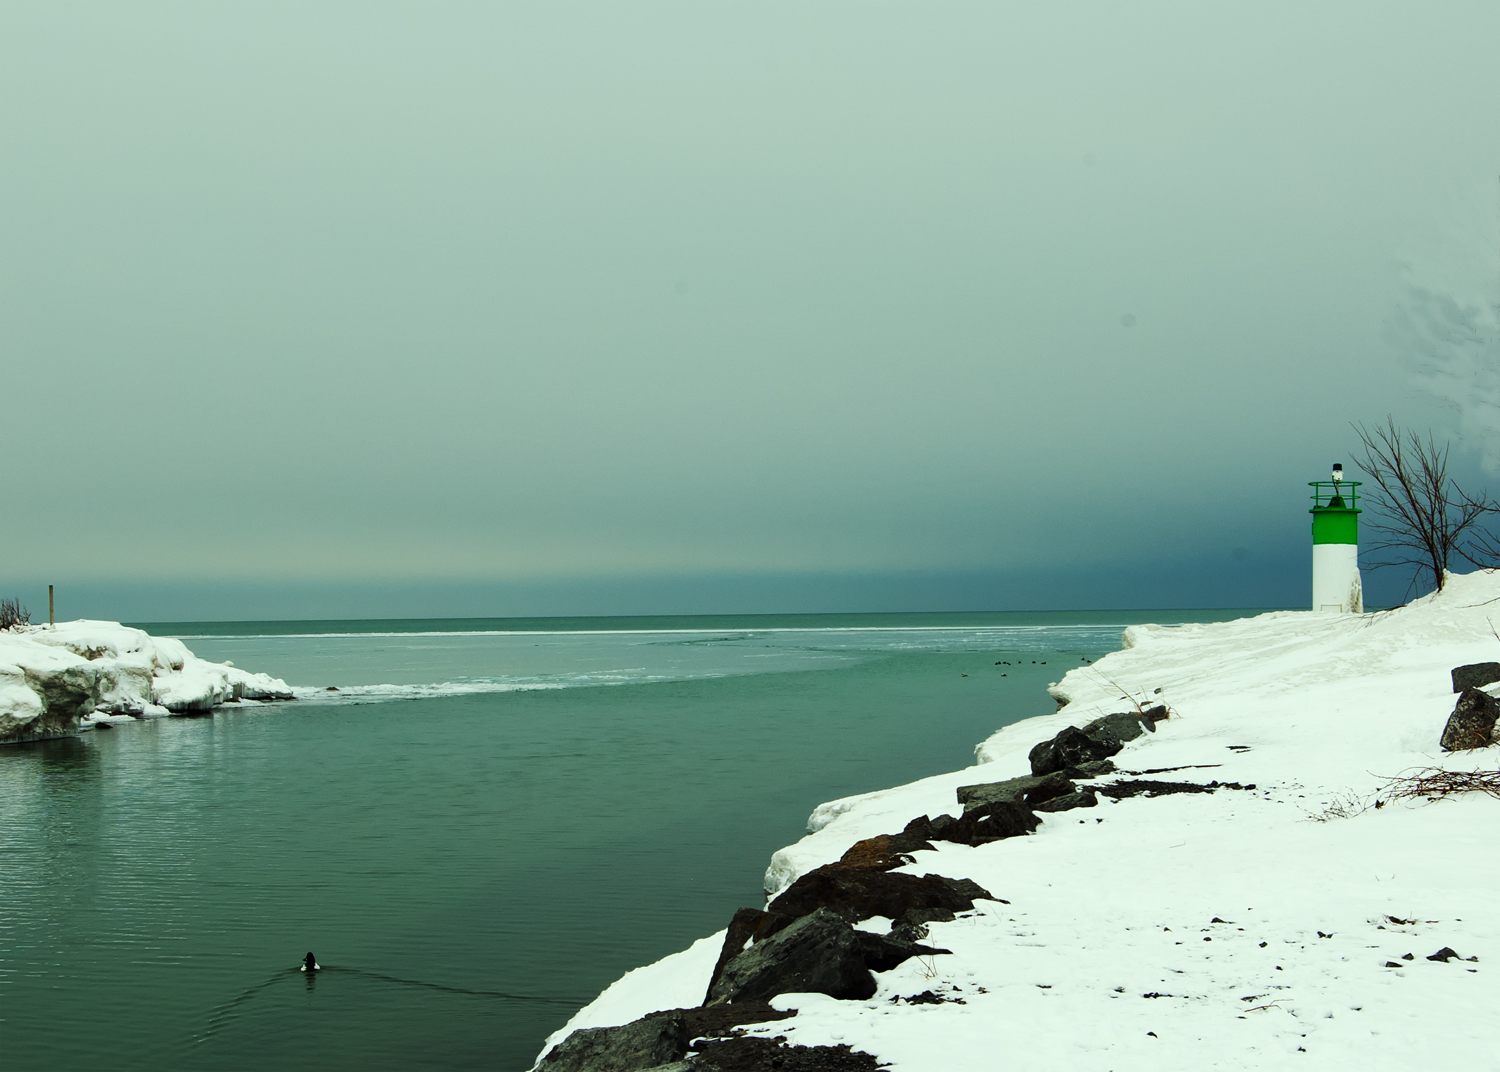 A lone duck swimming up a channel leading to Lake Ontario in winter, snowbanks on shore, a lighthouse with a green stripe in the background.  Dark blue skies.